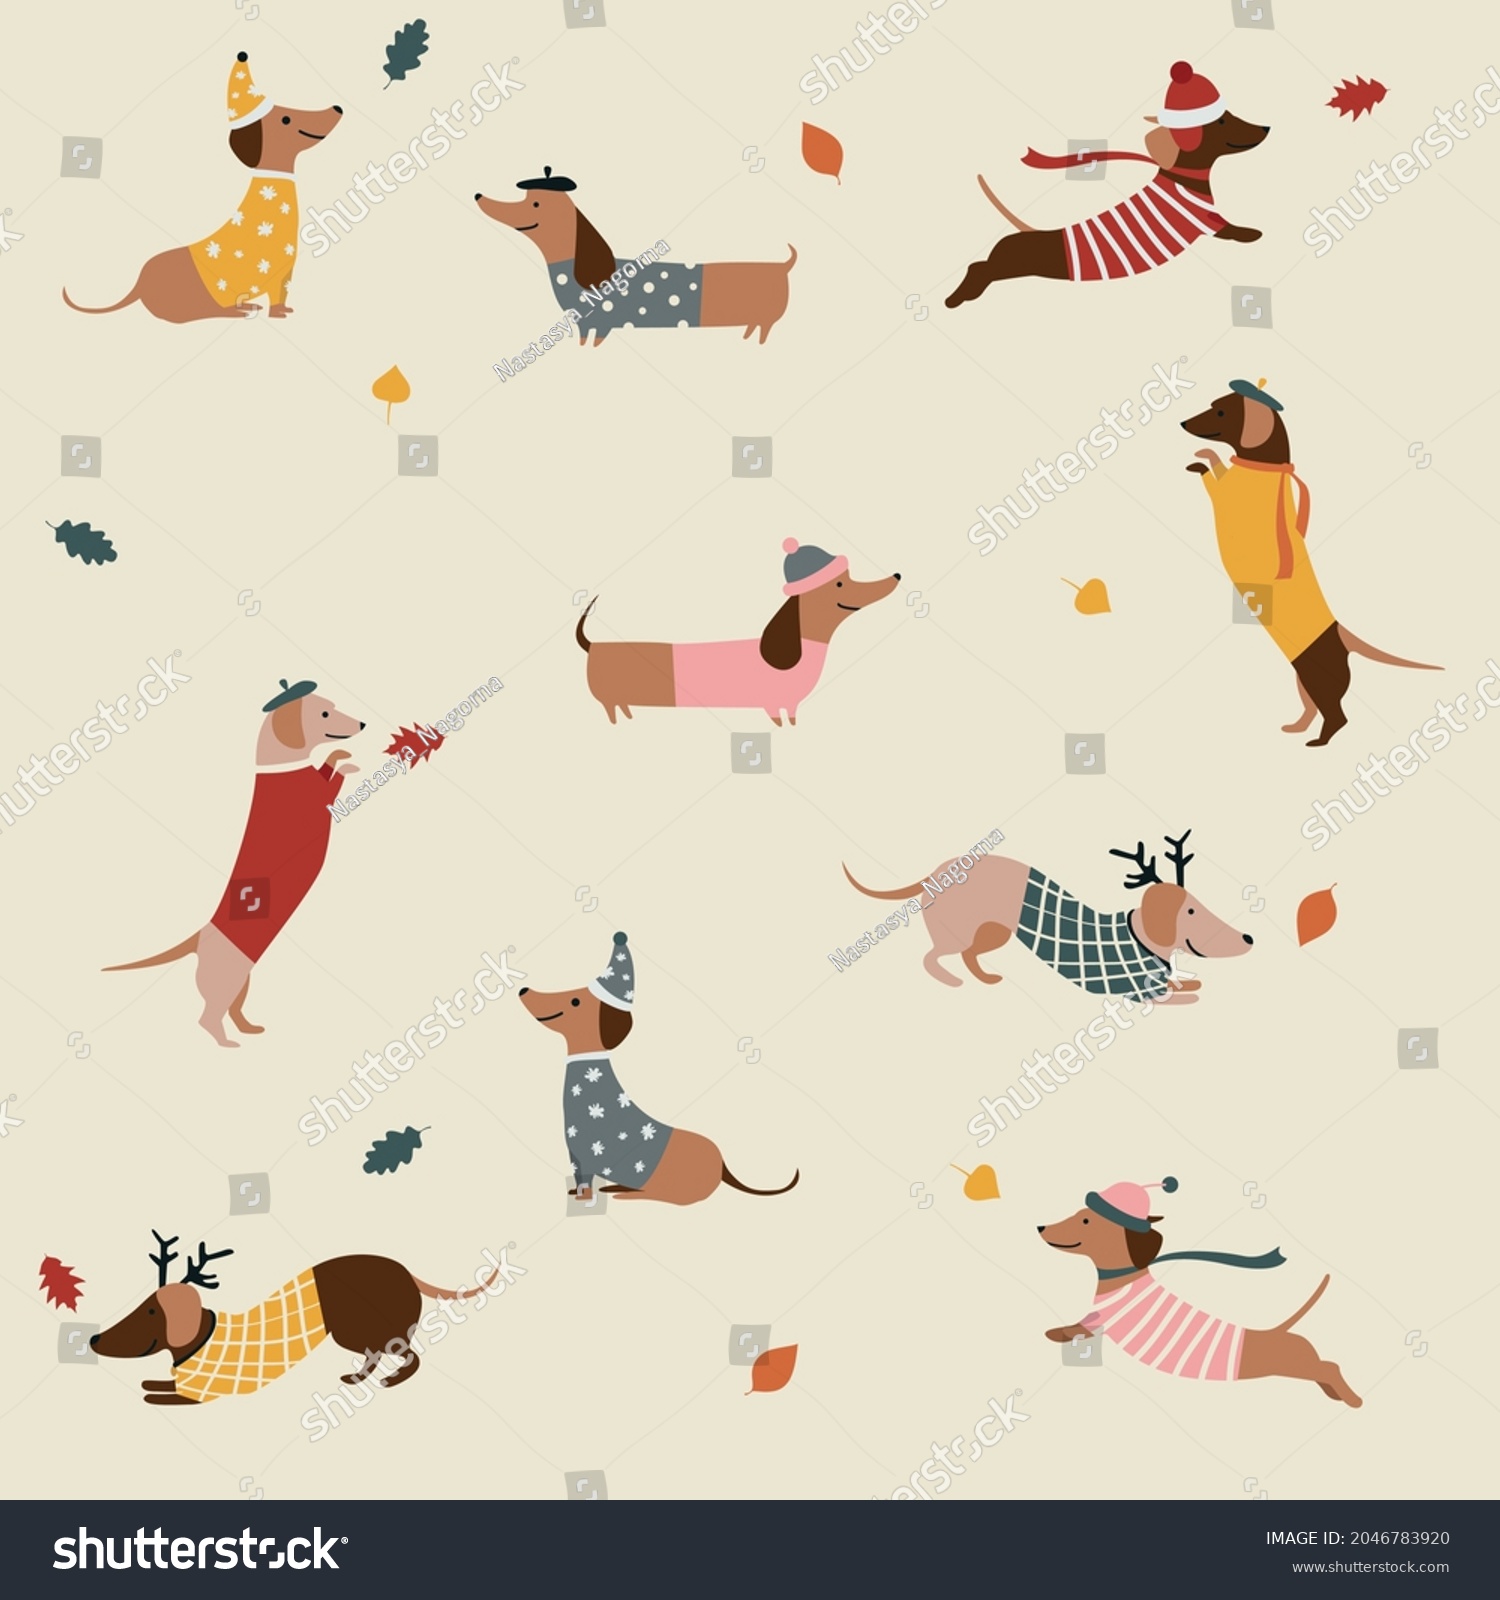 SVG of Autumn seamless pattern with dachshunds wearing hats and clothes on blue background. Vector illustration. Cute seamless pattern with long dogs dachshunds. Autumn leaves and dog svg